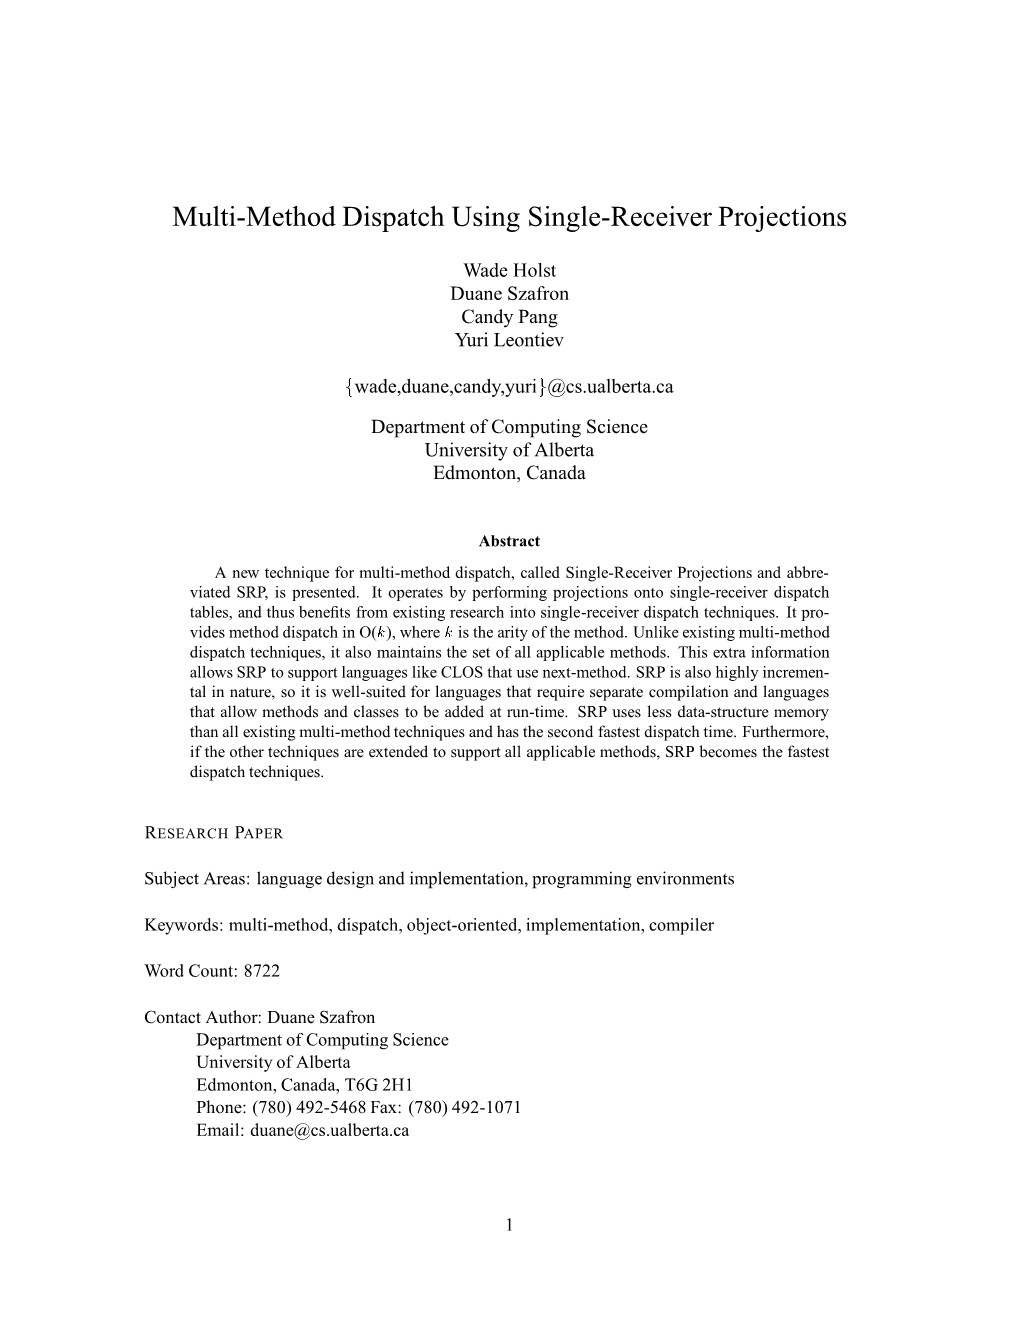 Multi-Method Dispatch Using Single-Receiver Projections